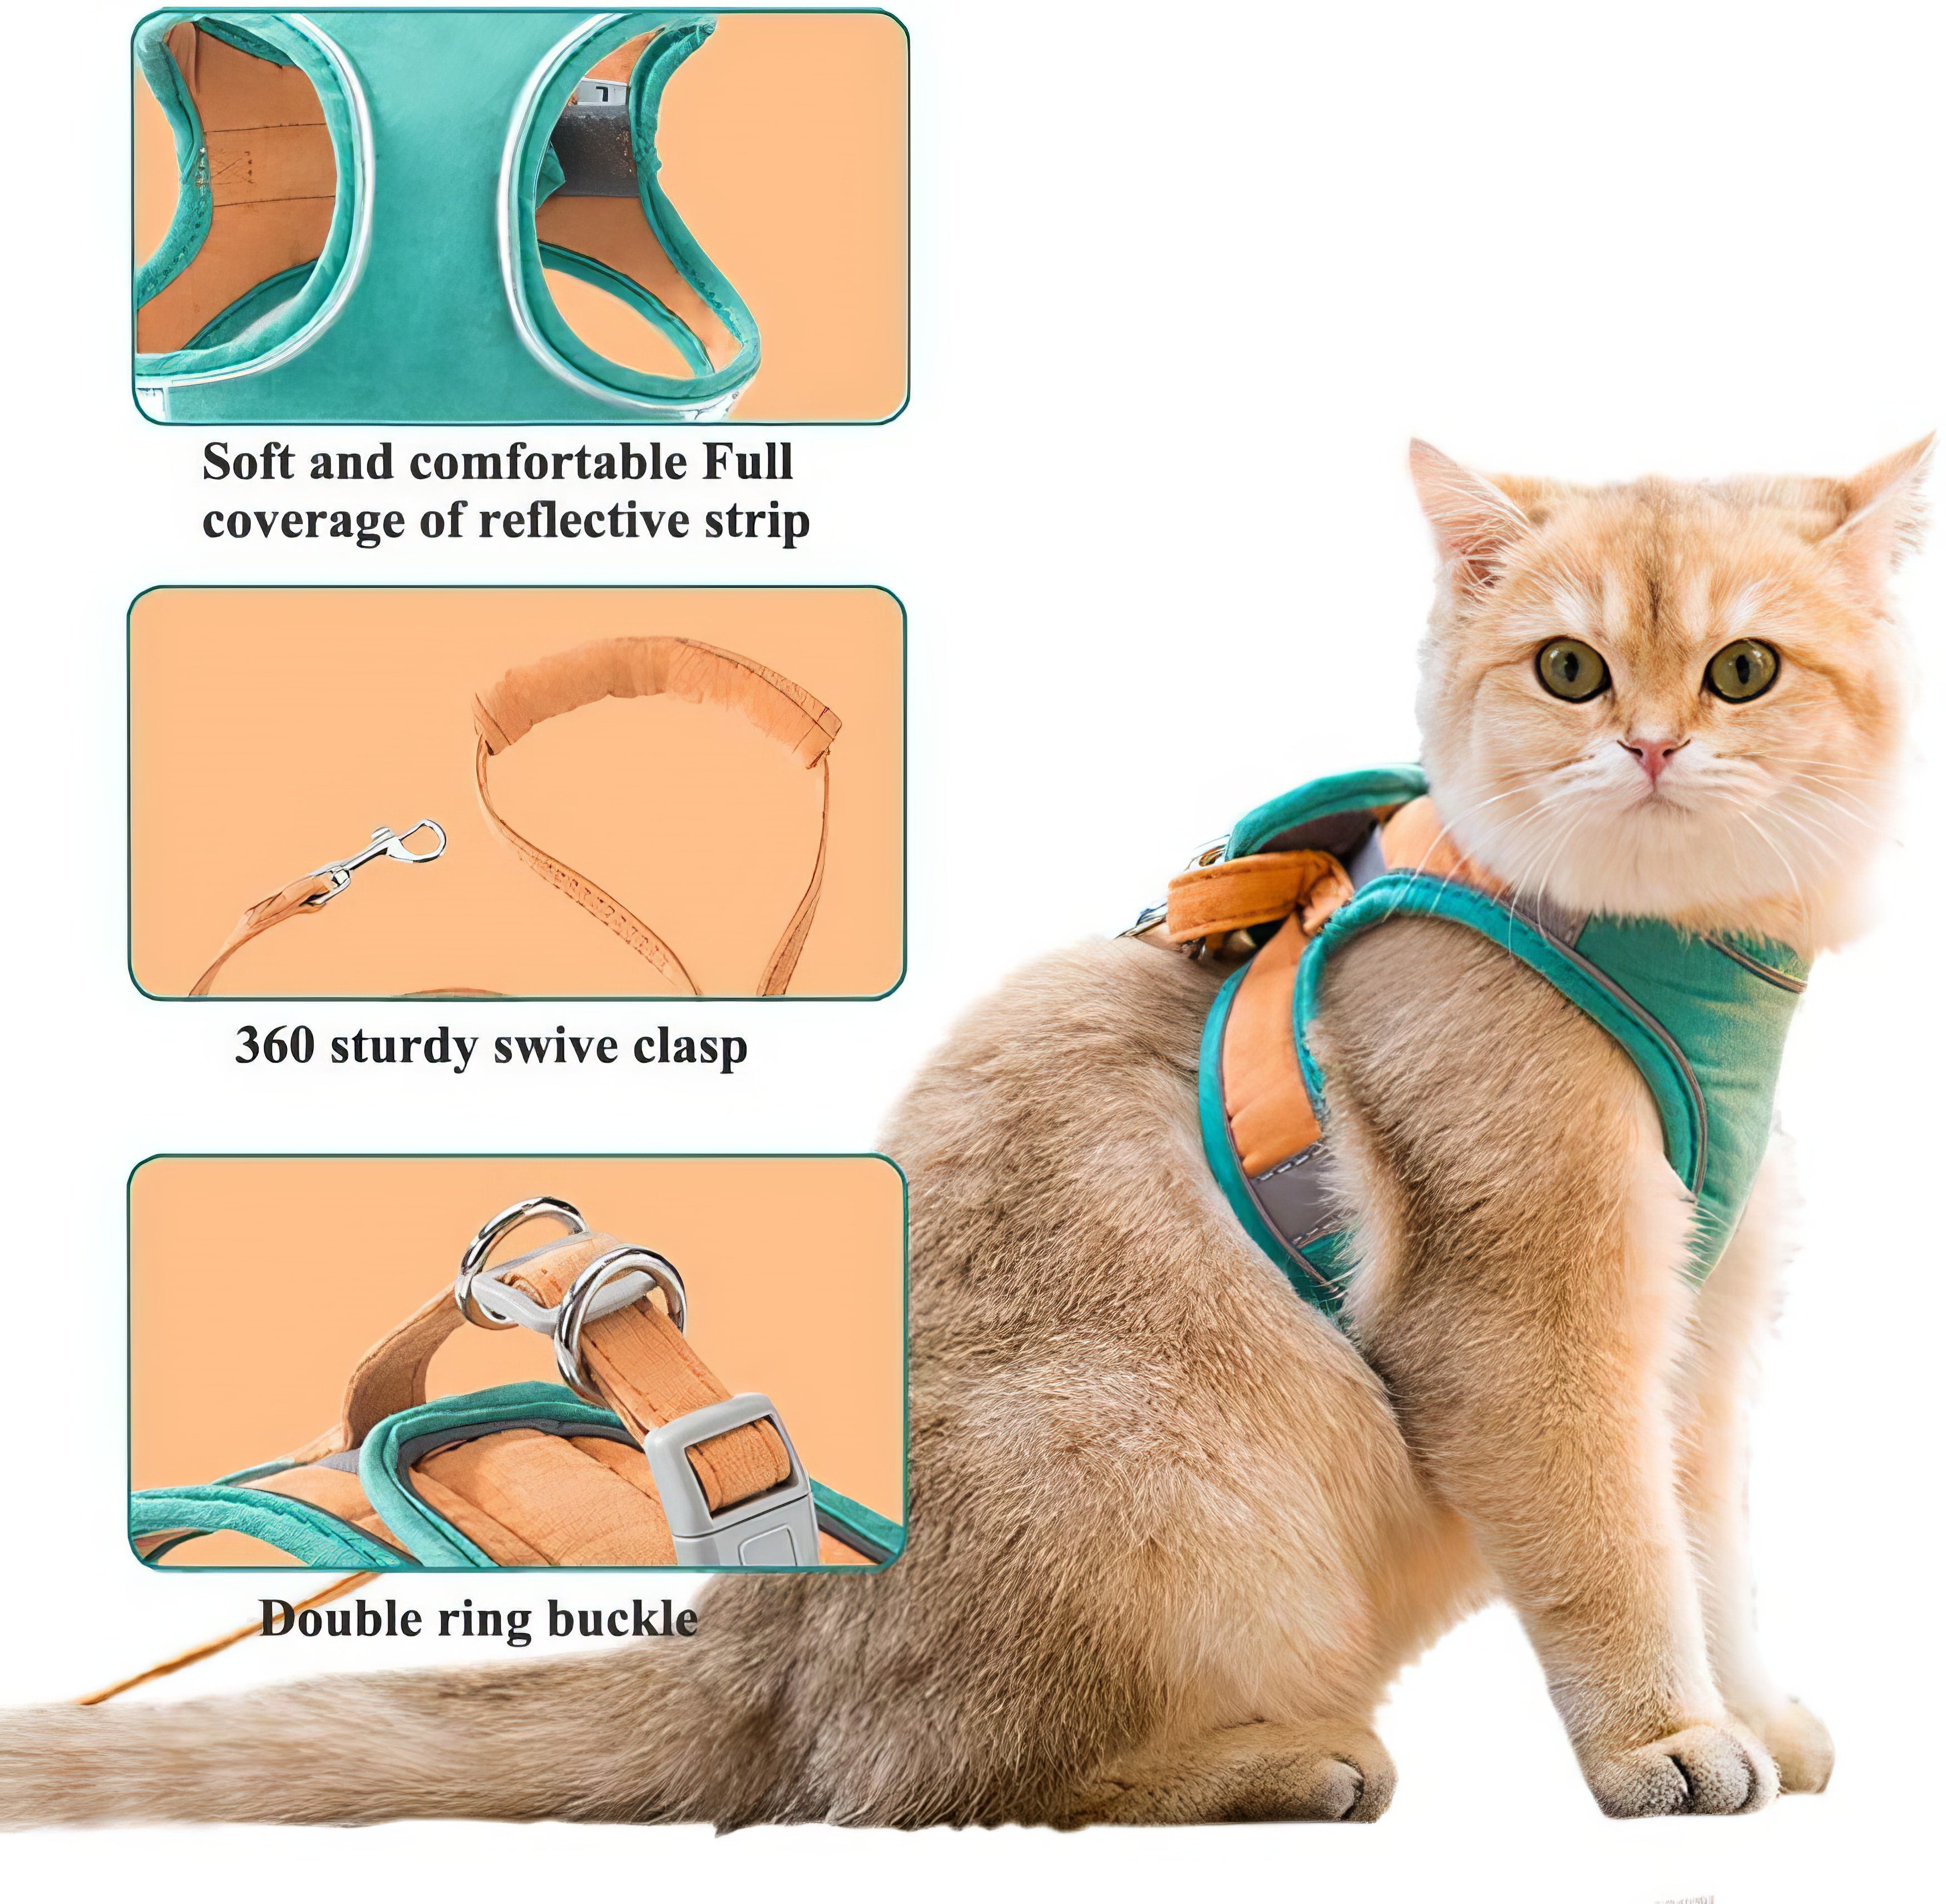 Adjustable Harness & Leash Set for Cats, Kittens and Pups - ESCAPE-PROOF & EASY TO WEAR